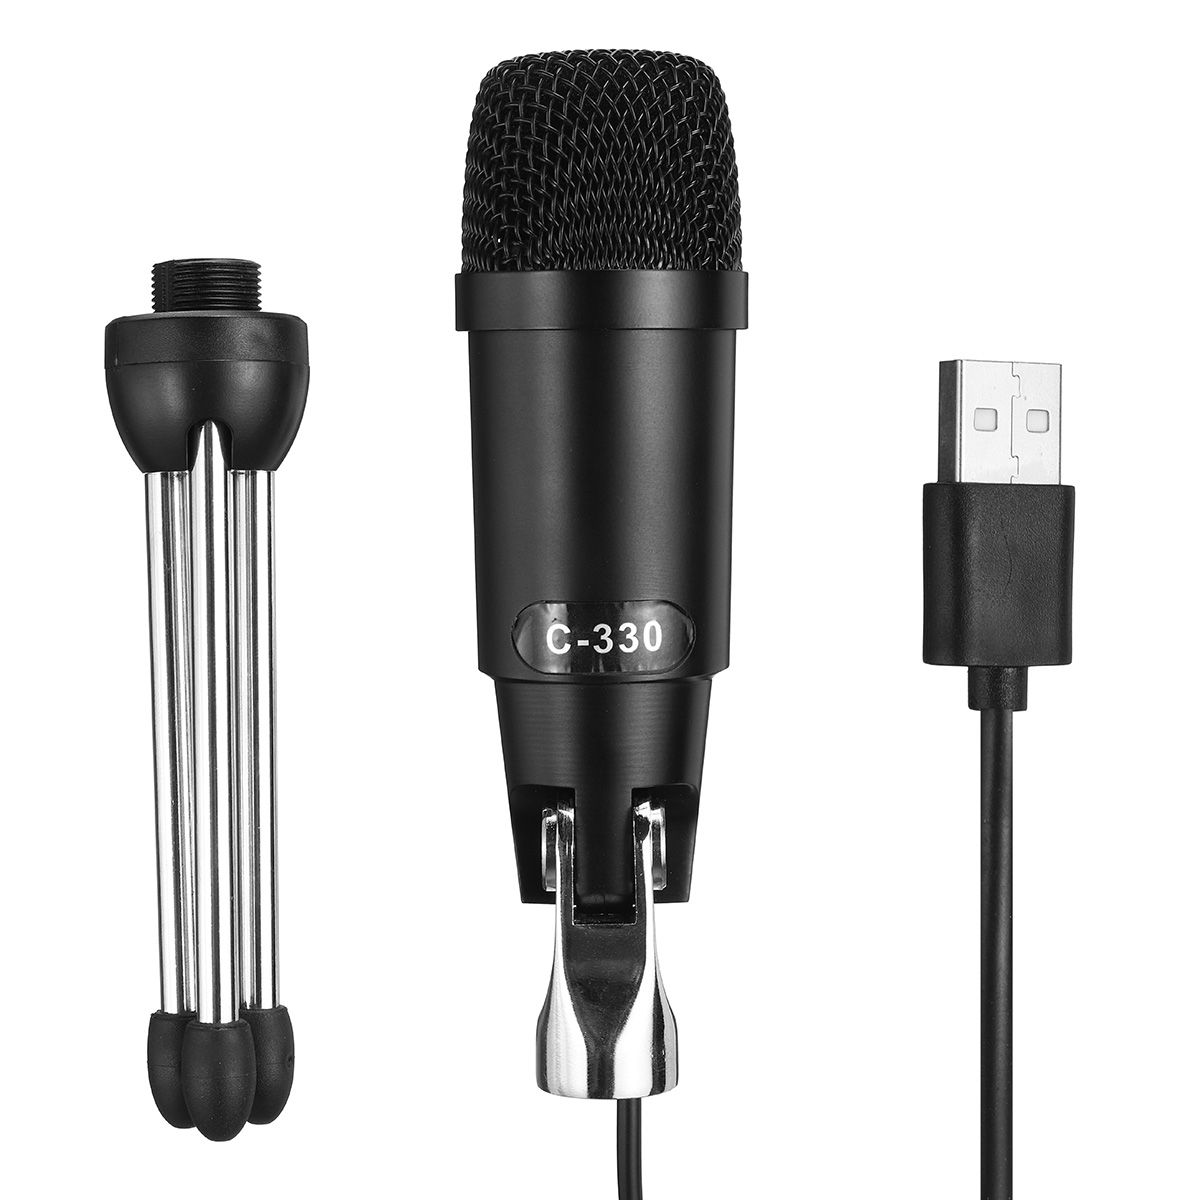 Professional-30Hz-20KHz-Dynamic-Cardioid-Capacitive-USB-Wired-Microphone-Mic-with-Desktop-Tripod-for-1717840